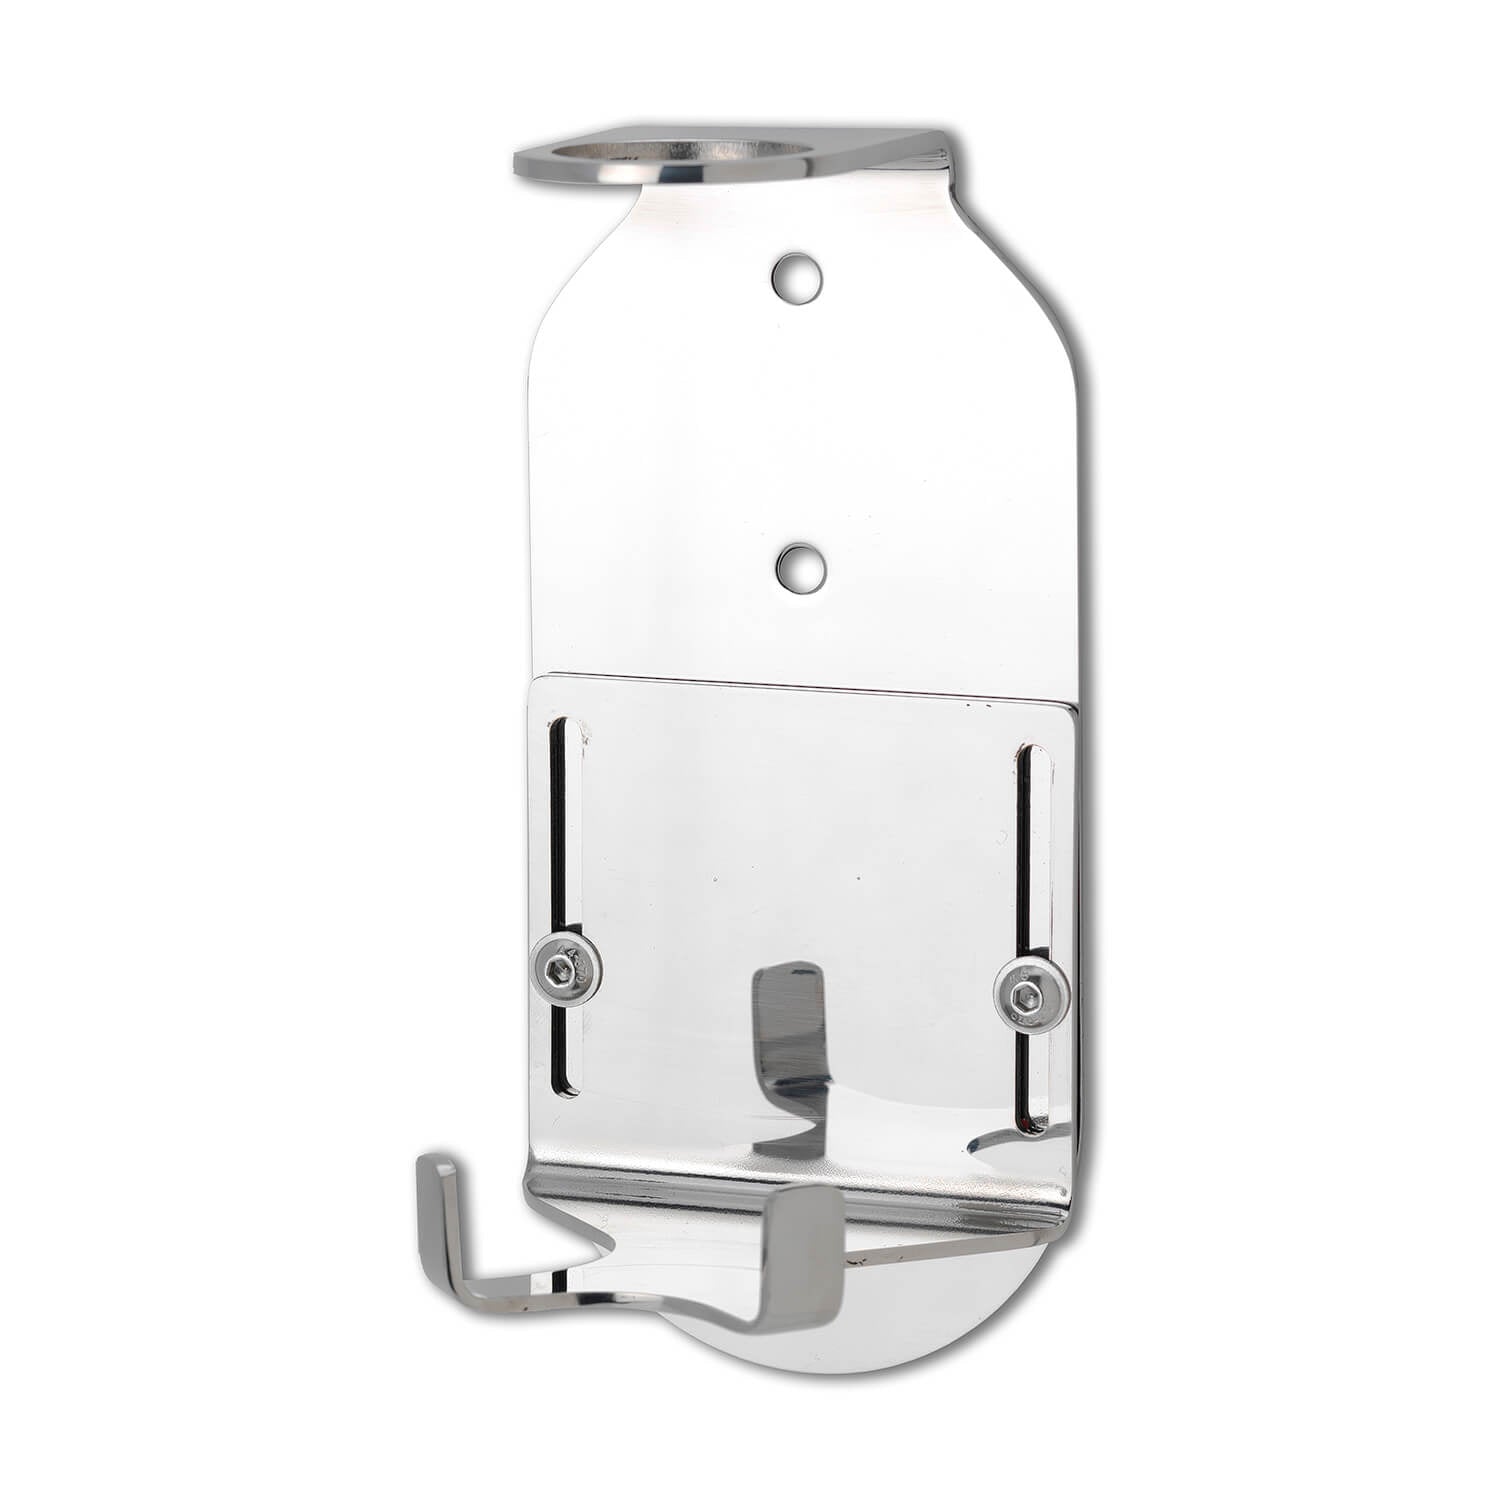 Single 300ml Security Wall Mounted Holder